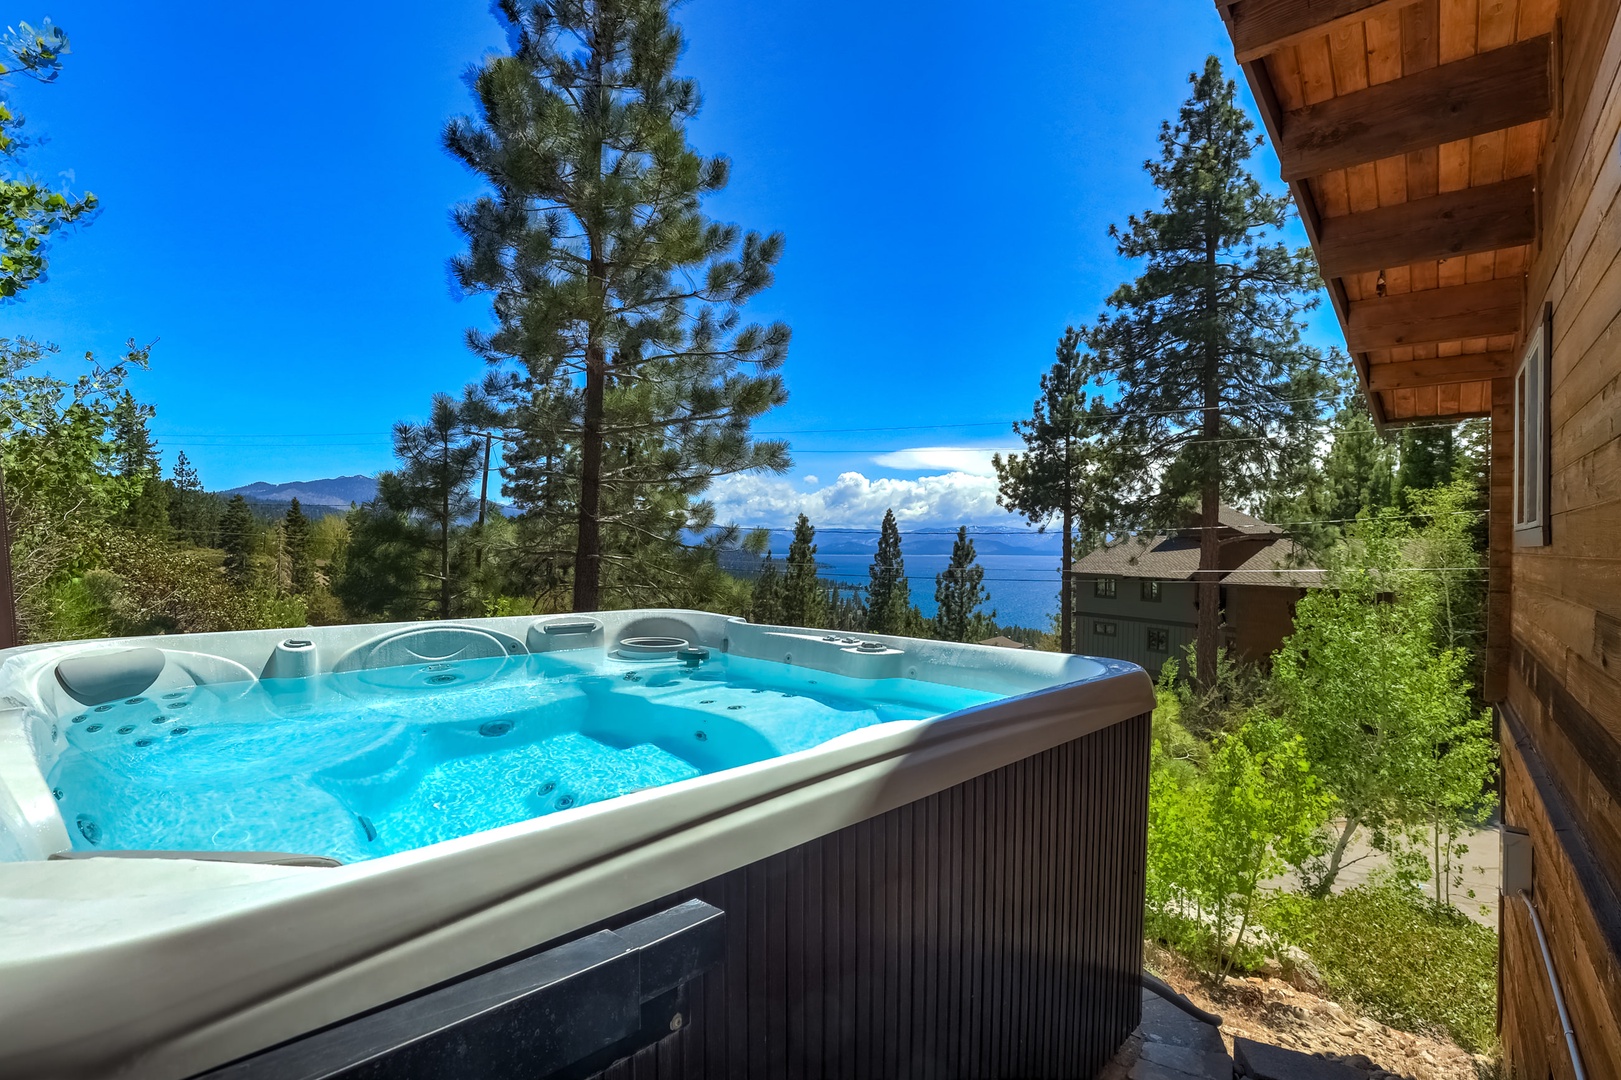 Private outdoor hot tub overlooking the lake